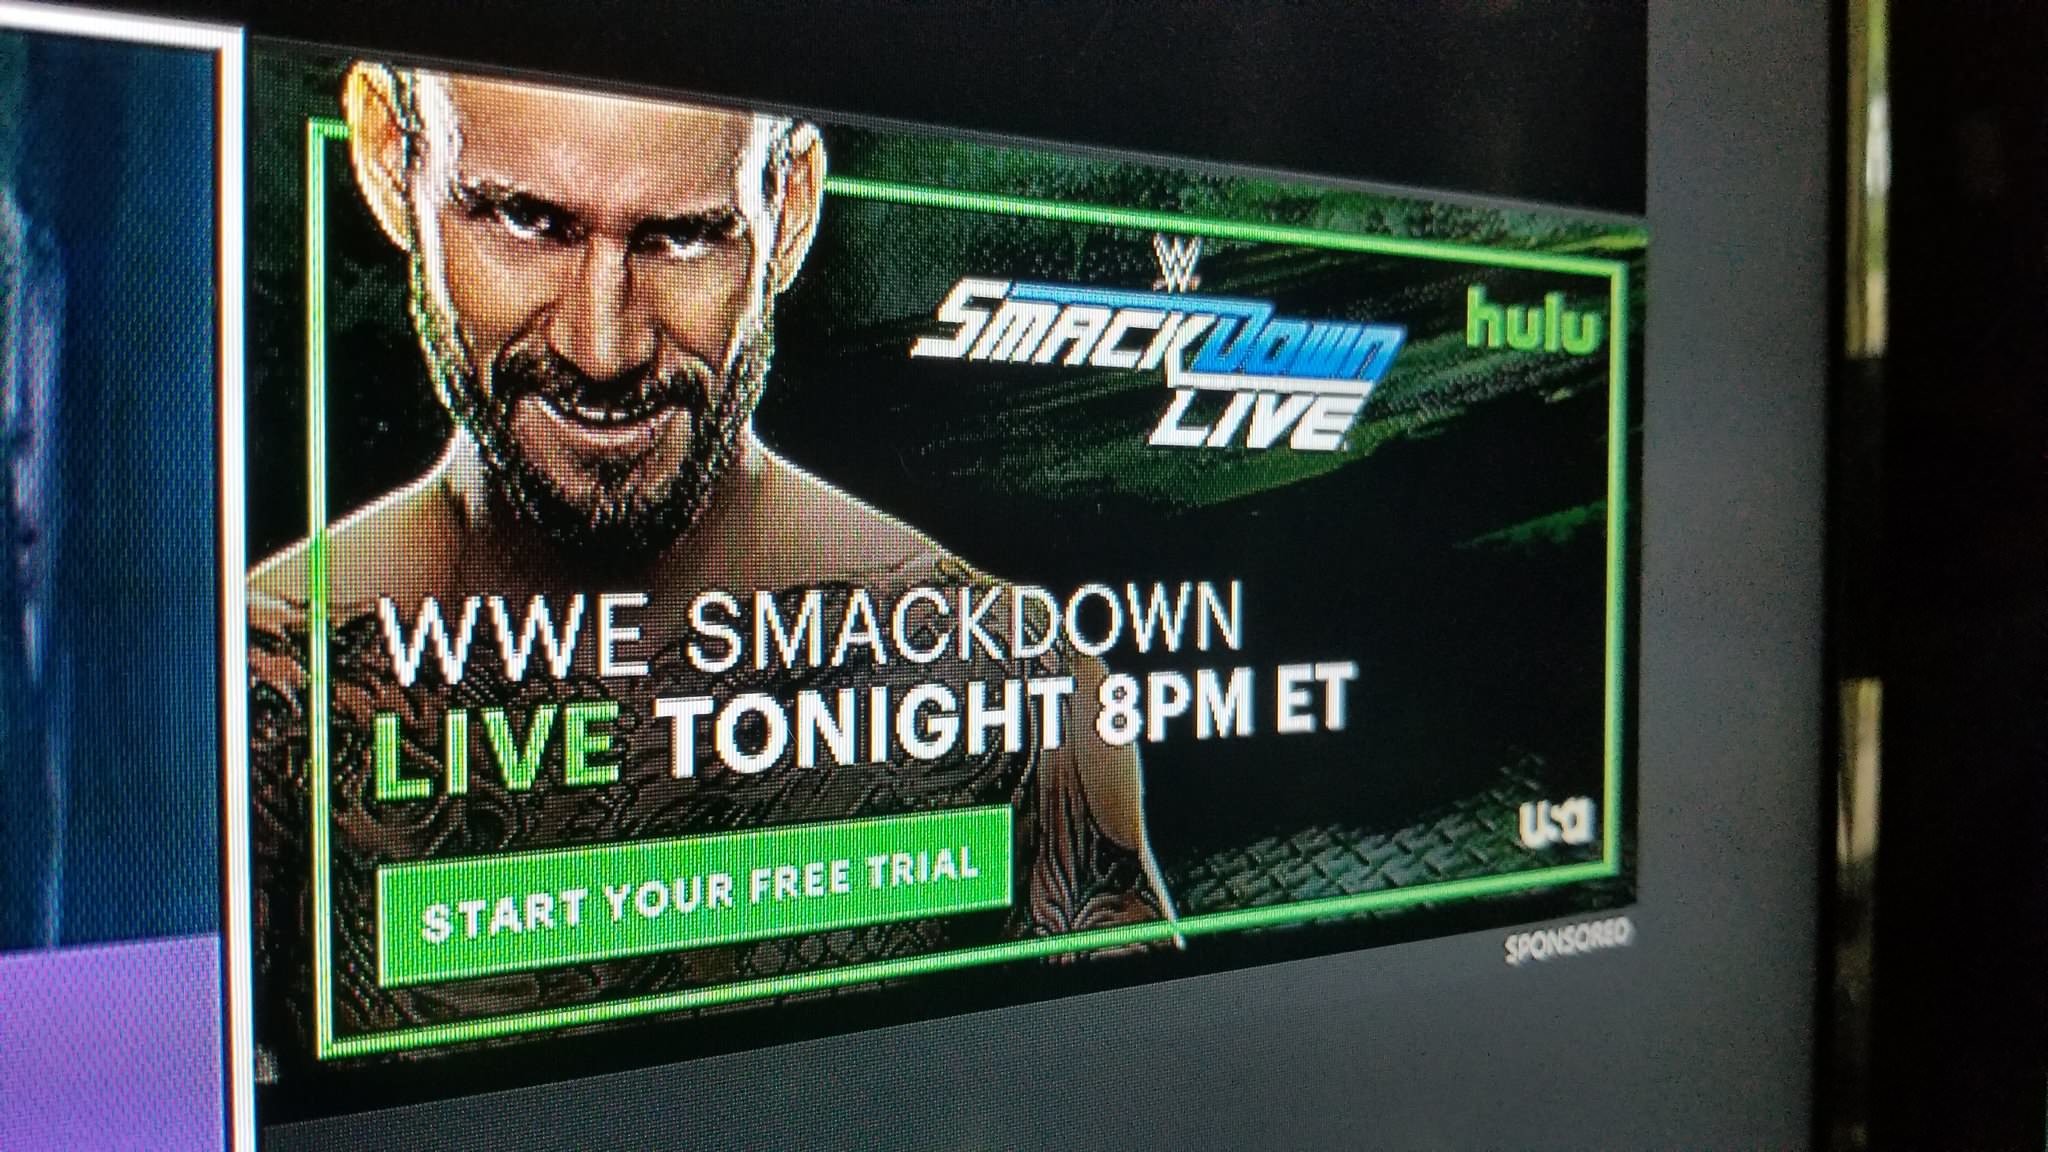 2048x1152 C.M. Punk Falsely Advertised For SmackDown on Hulu